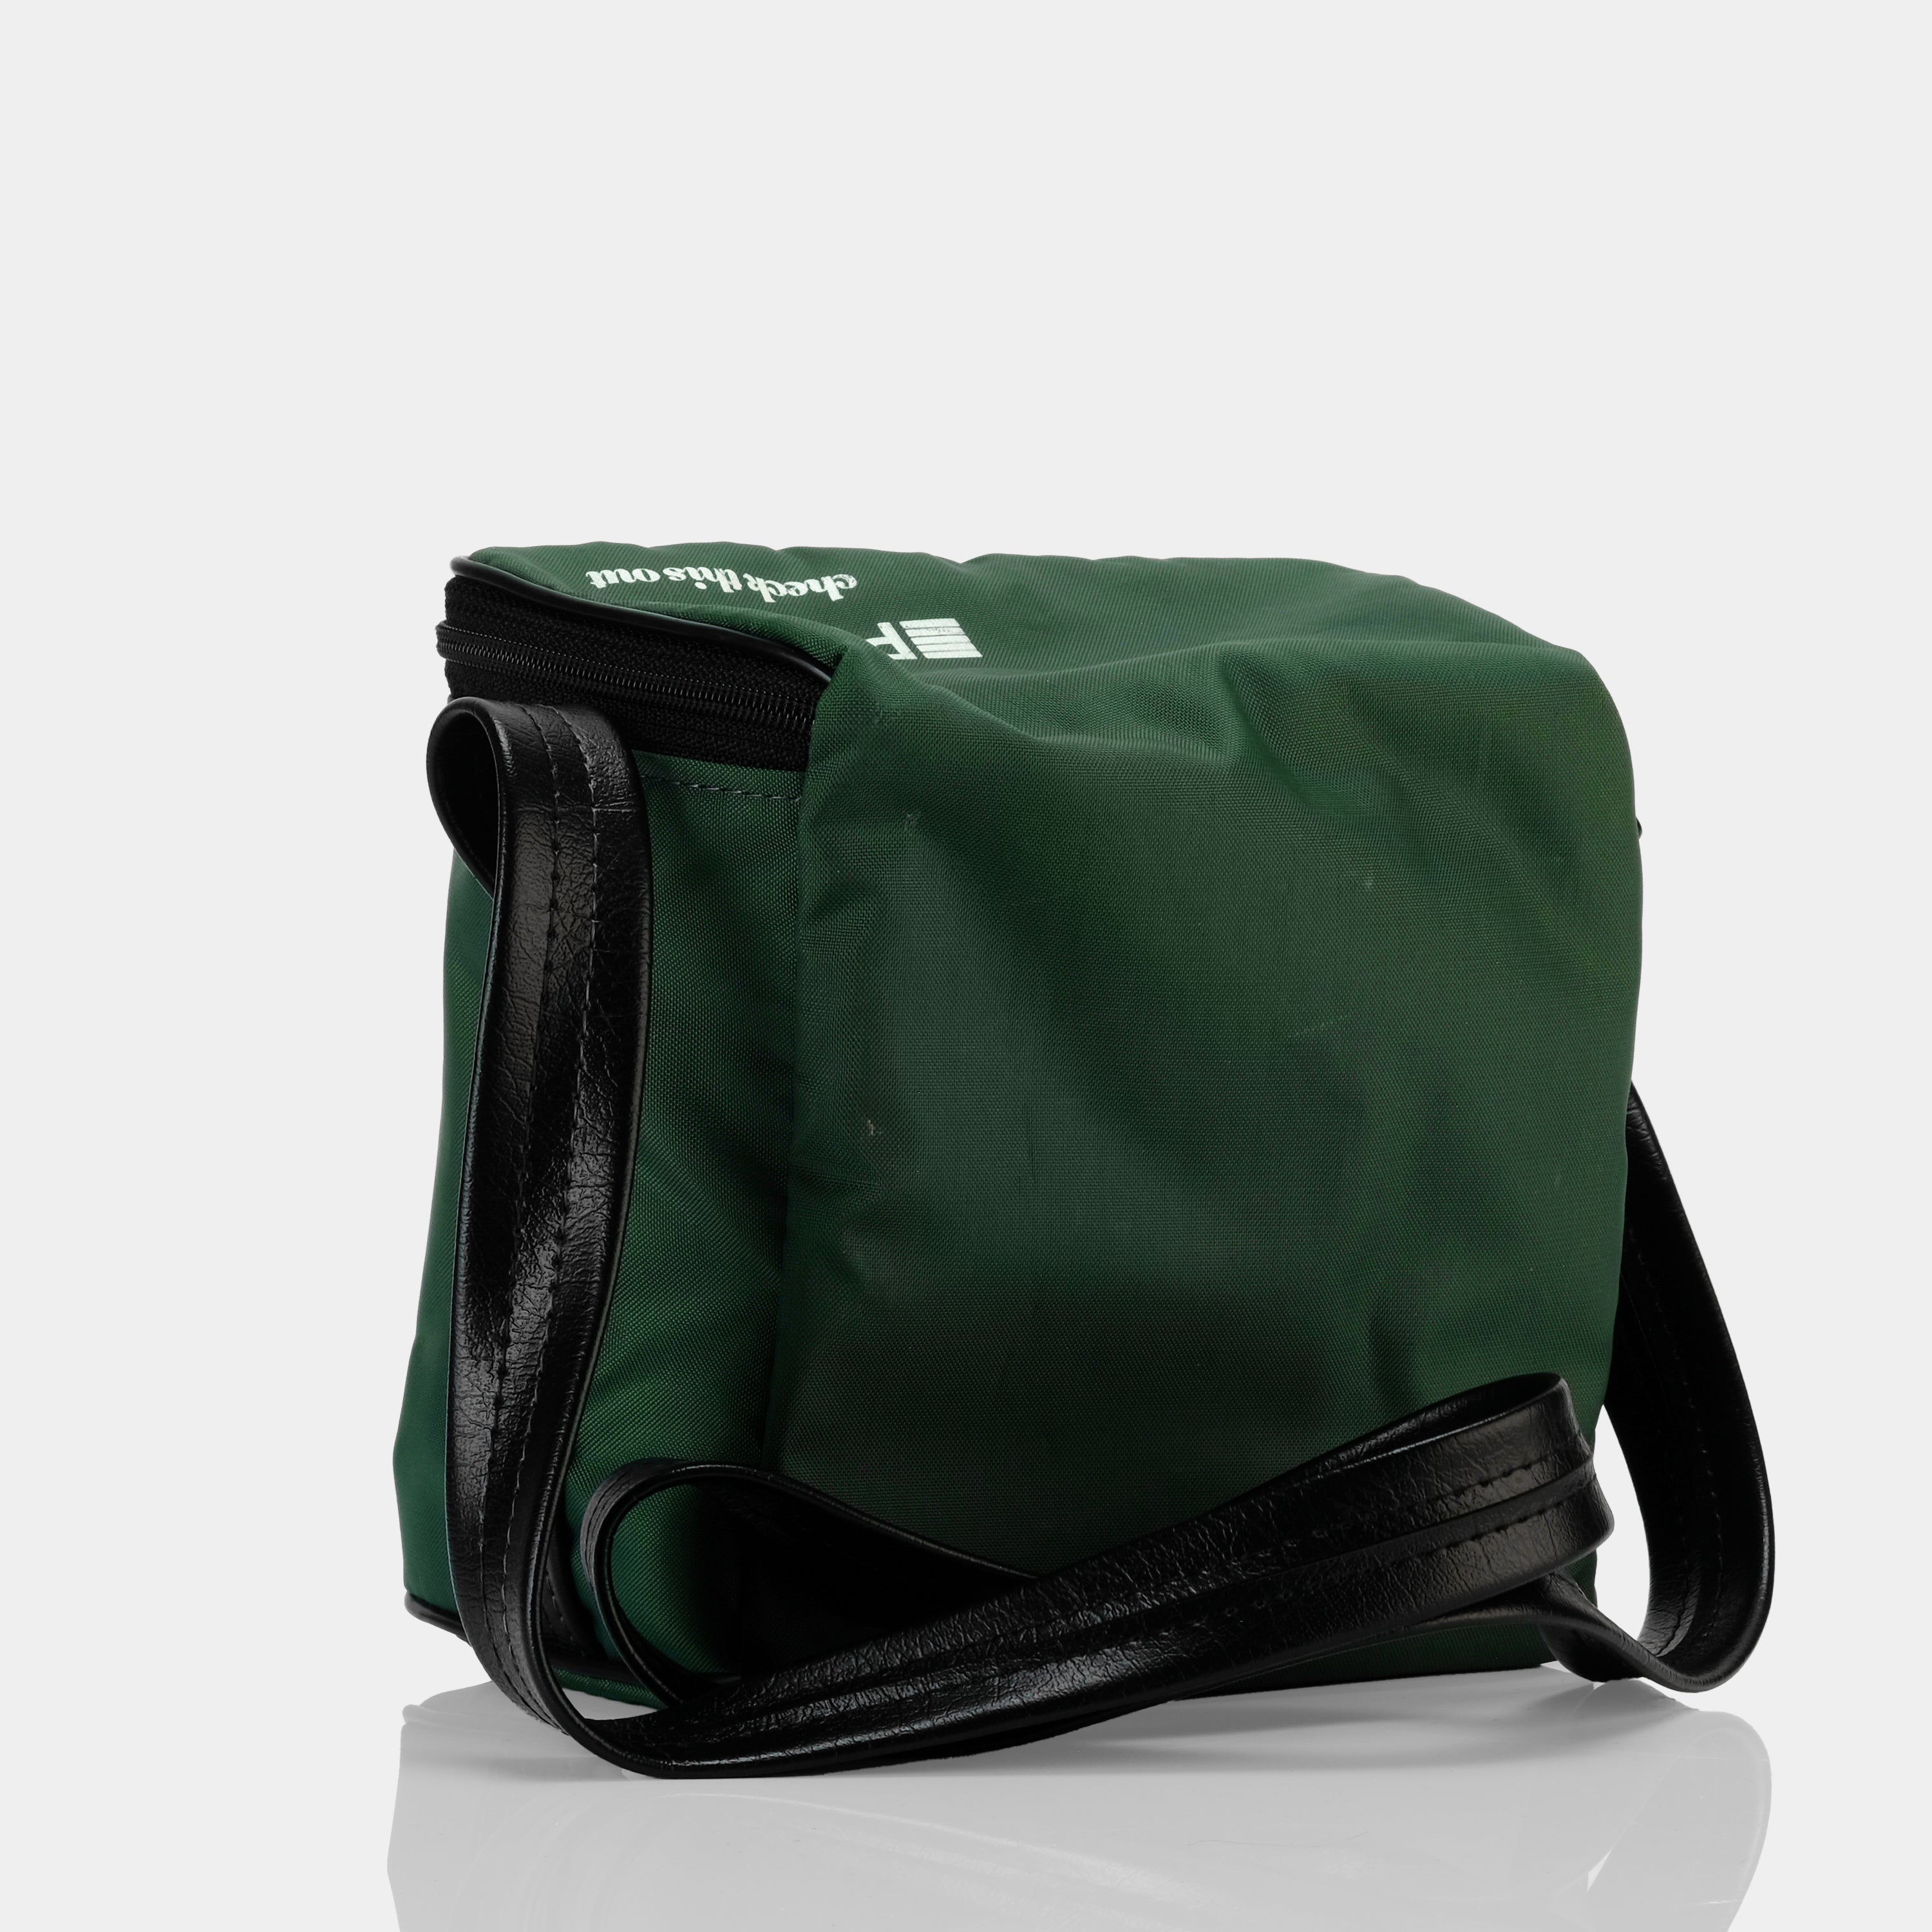 Polaroid Green "Check This Out" Instant Camera Bag